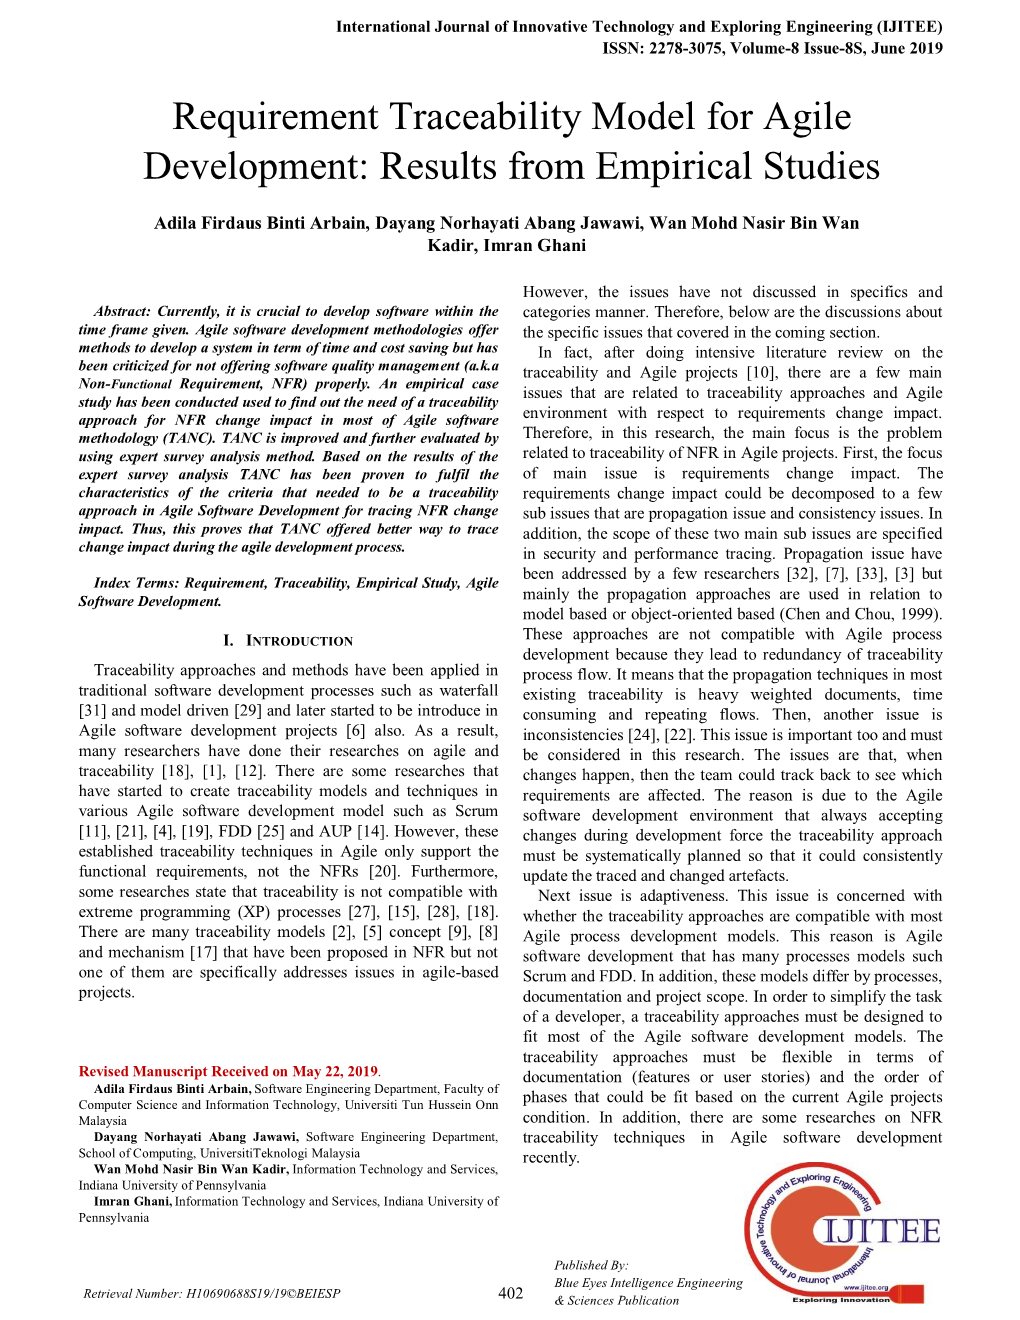 Requirement Traceability Model for Agile Development: Results from Empirical Studies